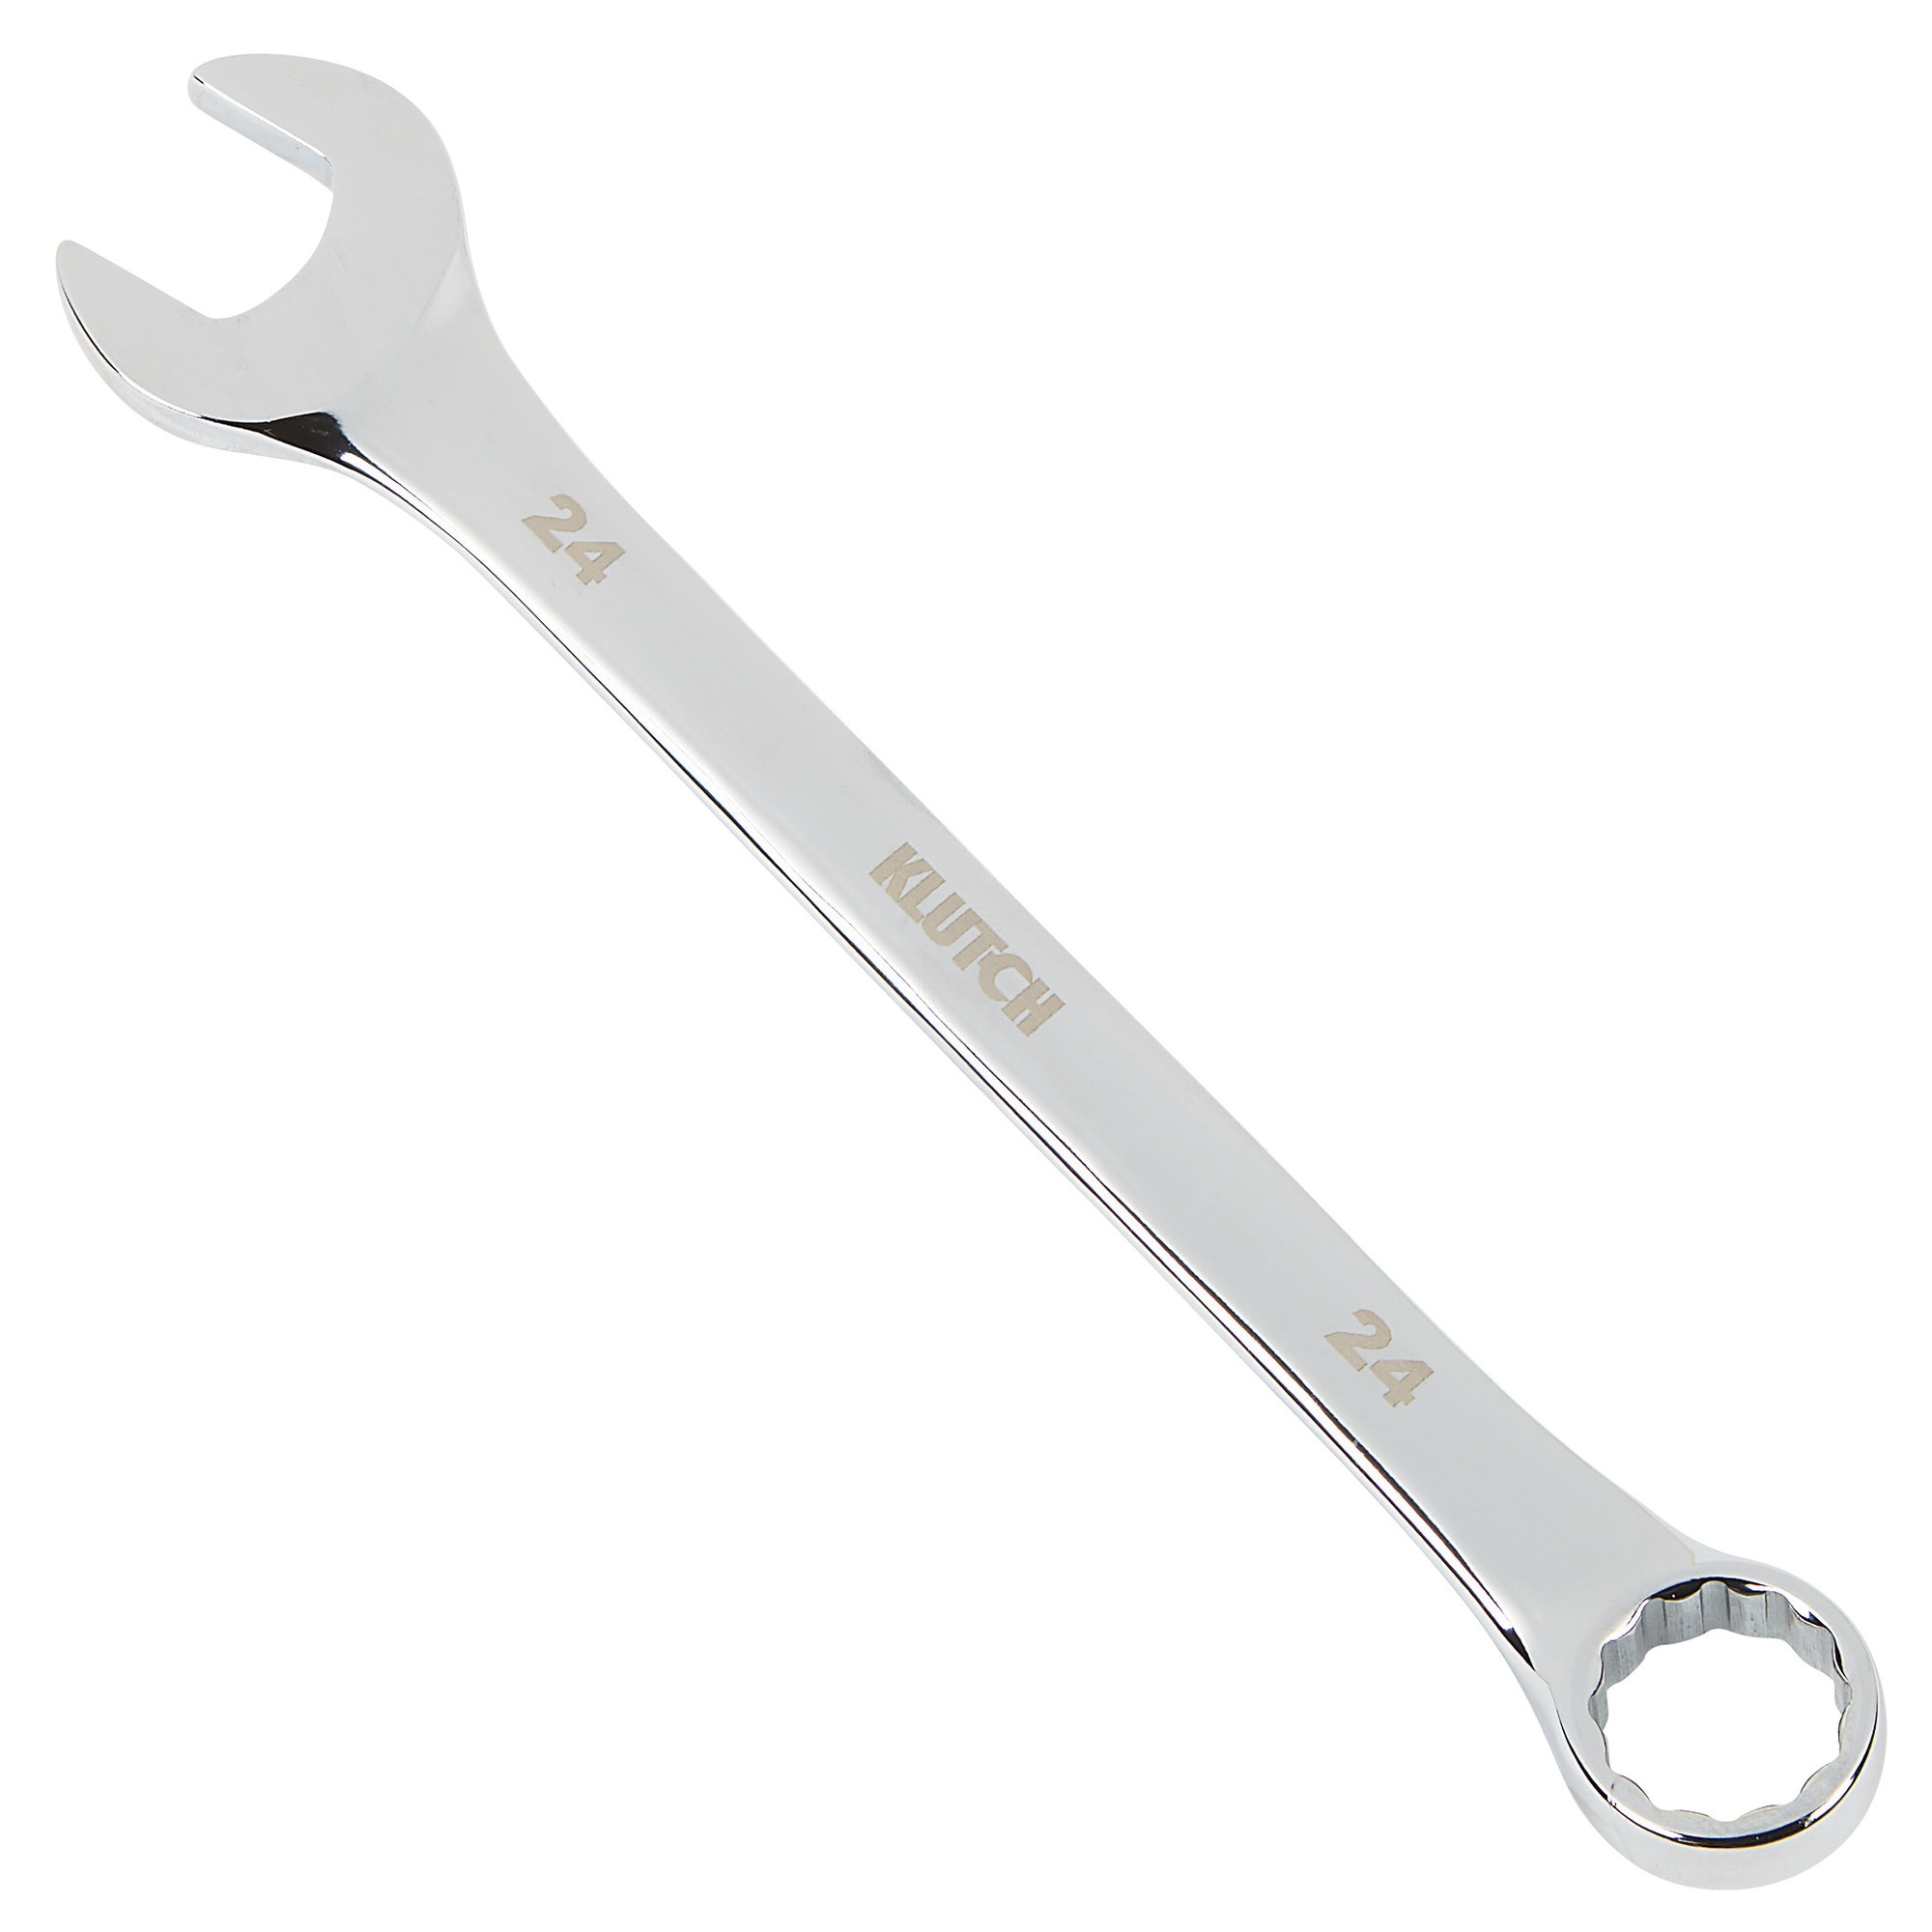 Klutch Combination Wrench, 24mm x 10.55Inch, Model E-2004